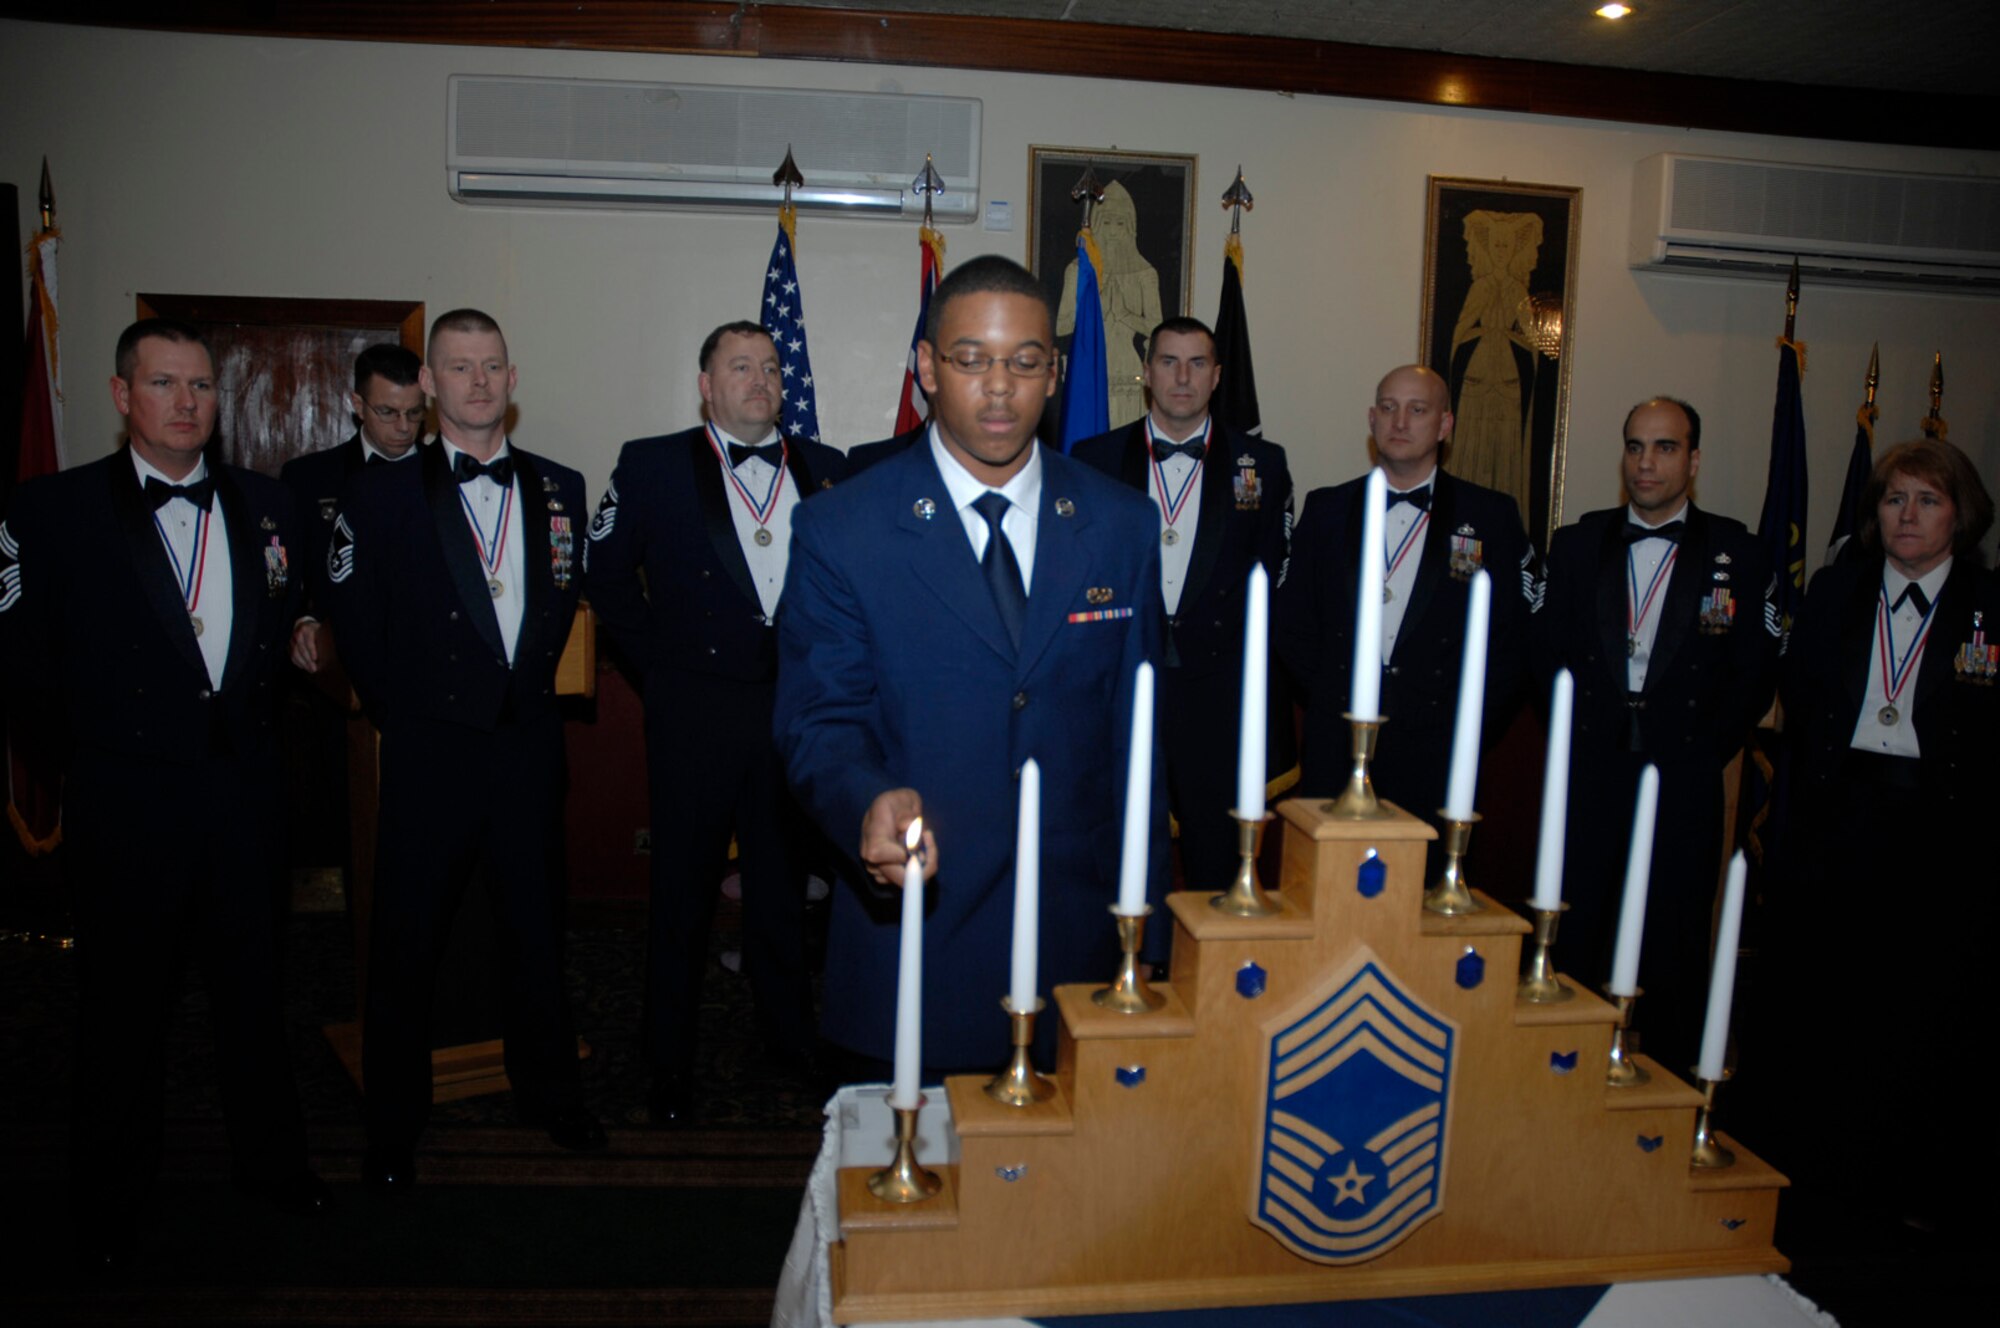 Airman Basic Lenier Petite, 100th Aircraft Maintenance Squadron, lights the first candle during the United Kingdom Chief’s Recognition Ceremony at RAF Lakenheath Feb. 9. Tradition states a member of each rank lights a candle signifying the transition through the ranks from Airman Basic to Chief Master Sergeant. (U.S. Air Force photo by Senior Airman Brian Ellis)
